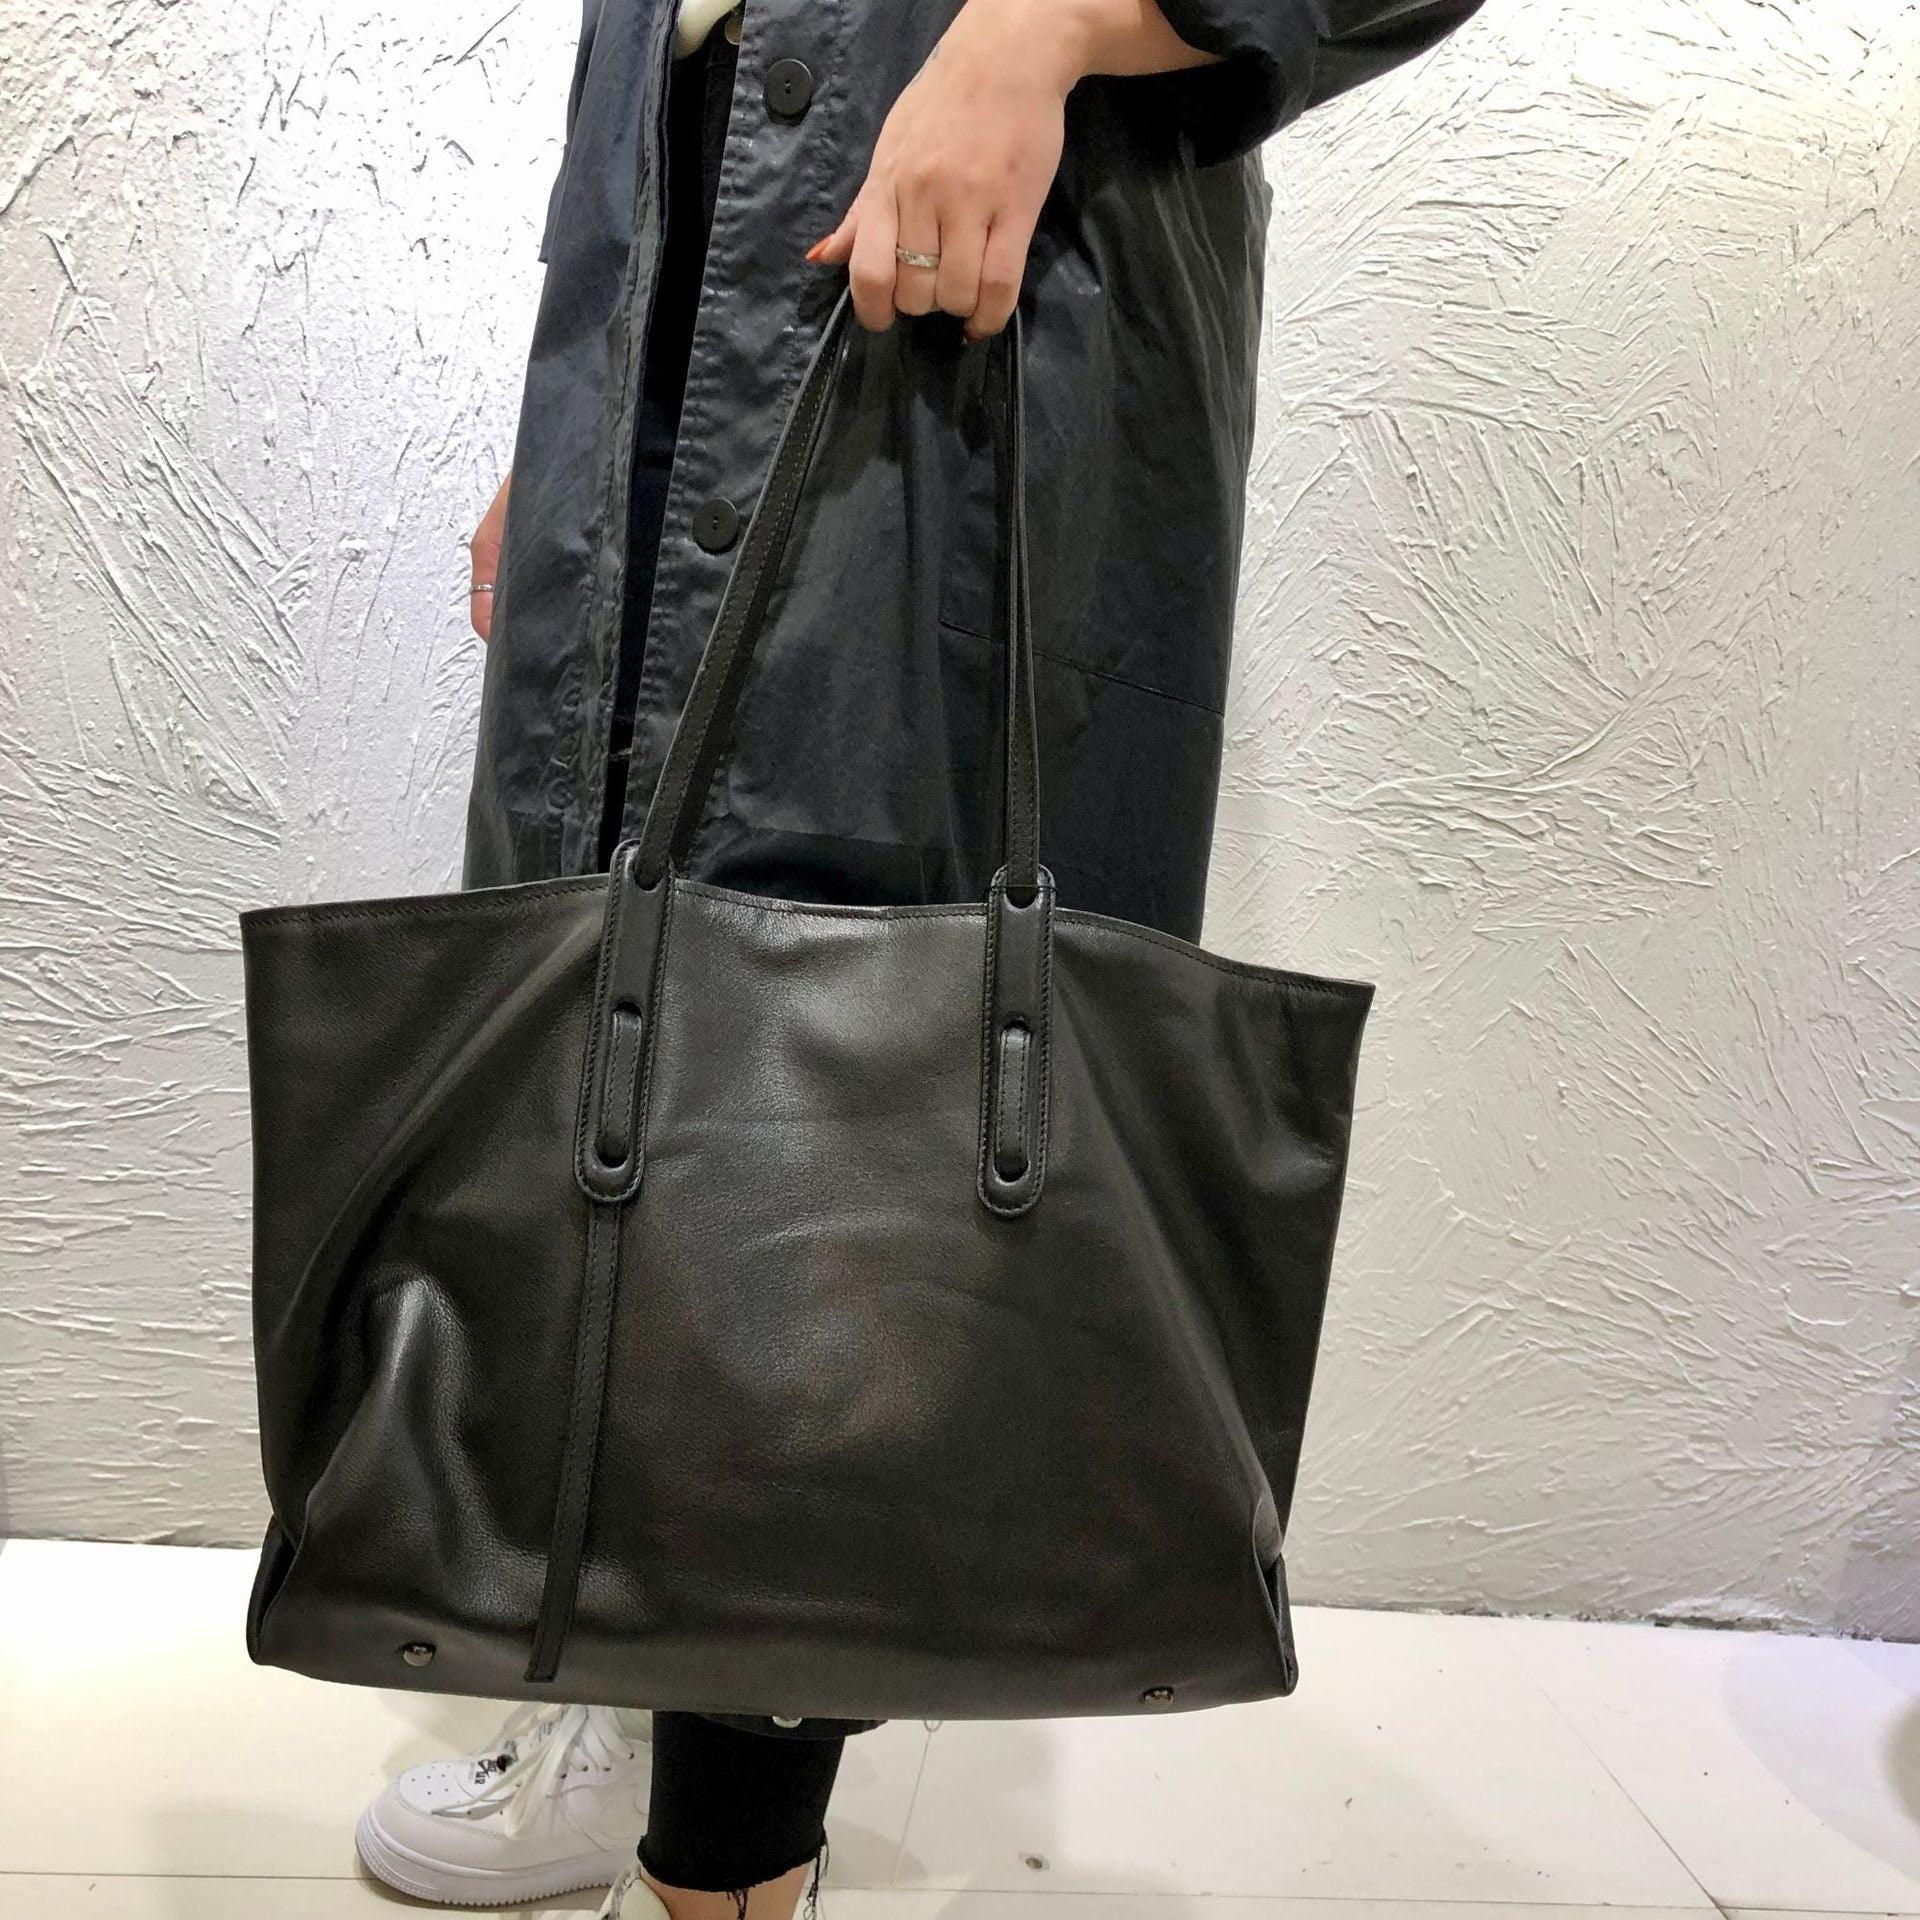 Minimalist Everyday Leather Tote Bag, Large Leather Tote Bag For Women, Tote Leather Bag, Leather Bag, Shoulder Tote Bag, Gift for Her